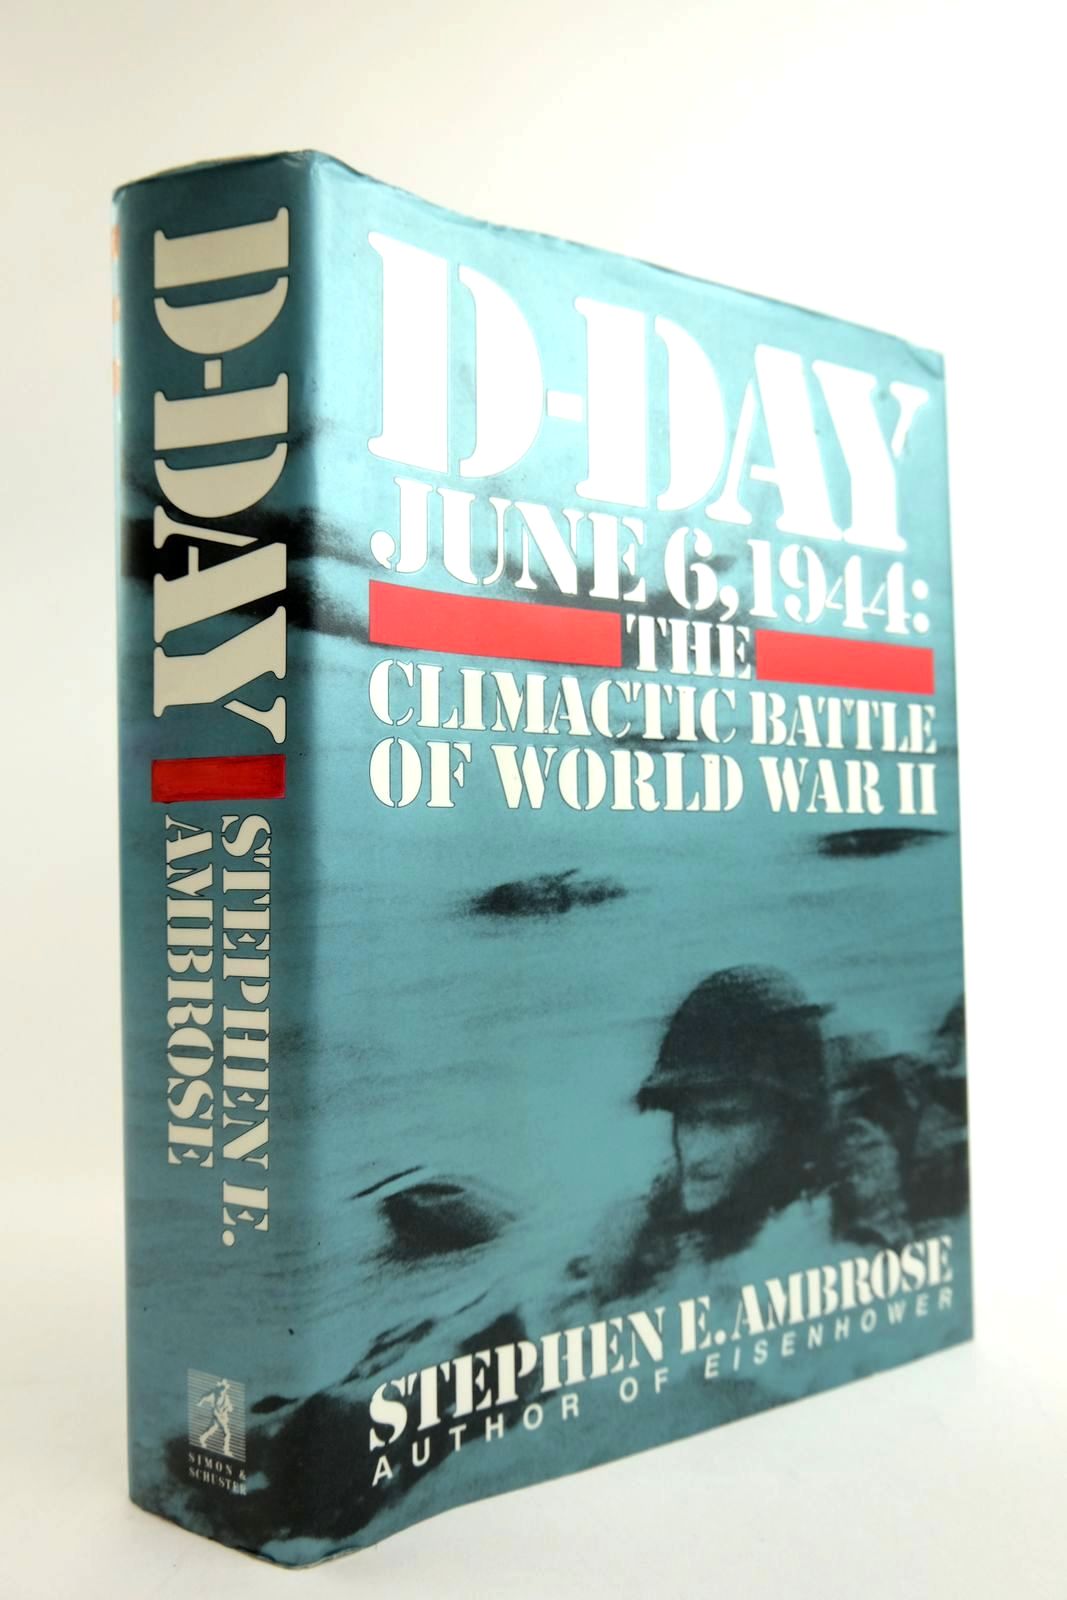 Photo of D-DAY JUNE 6, 1944: THE CLIMACTIC BATTLE OF WORLD WAR II written by Ambrose, Stephen E. published by Simon & Schuster (STOCK CODE: 2133433)  for sale by Stella & Rose's Books